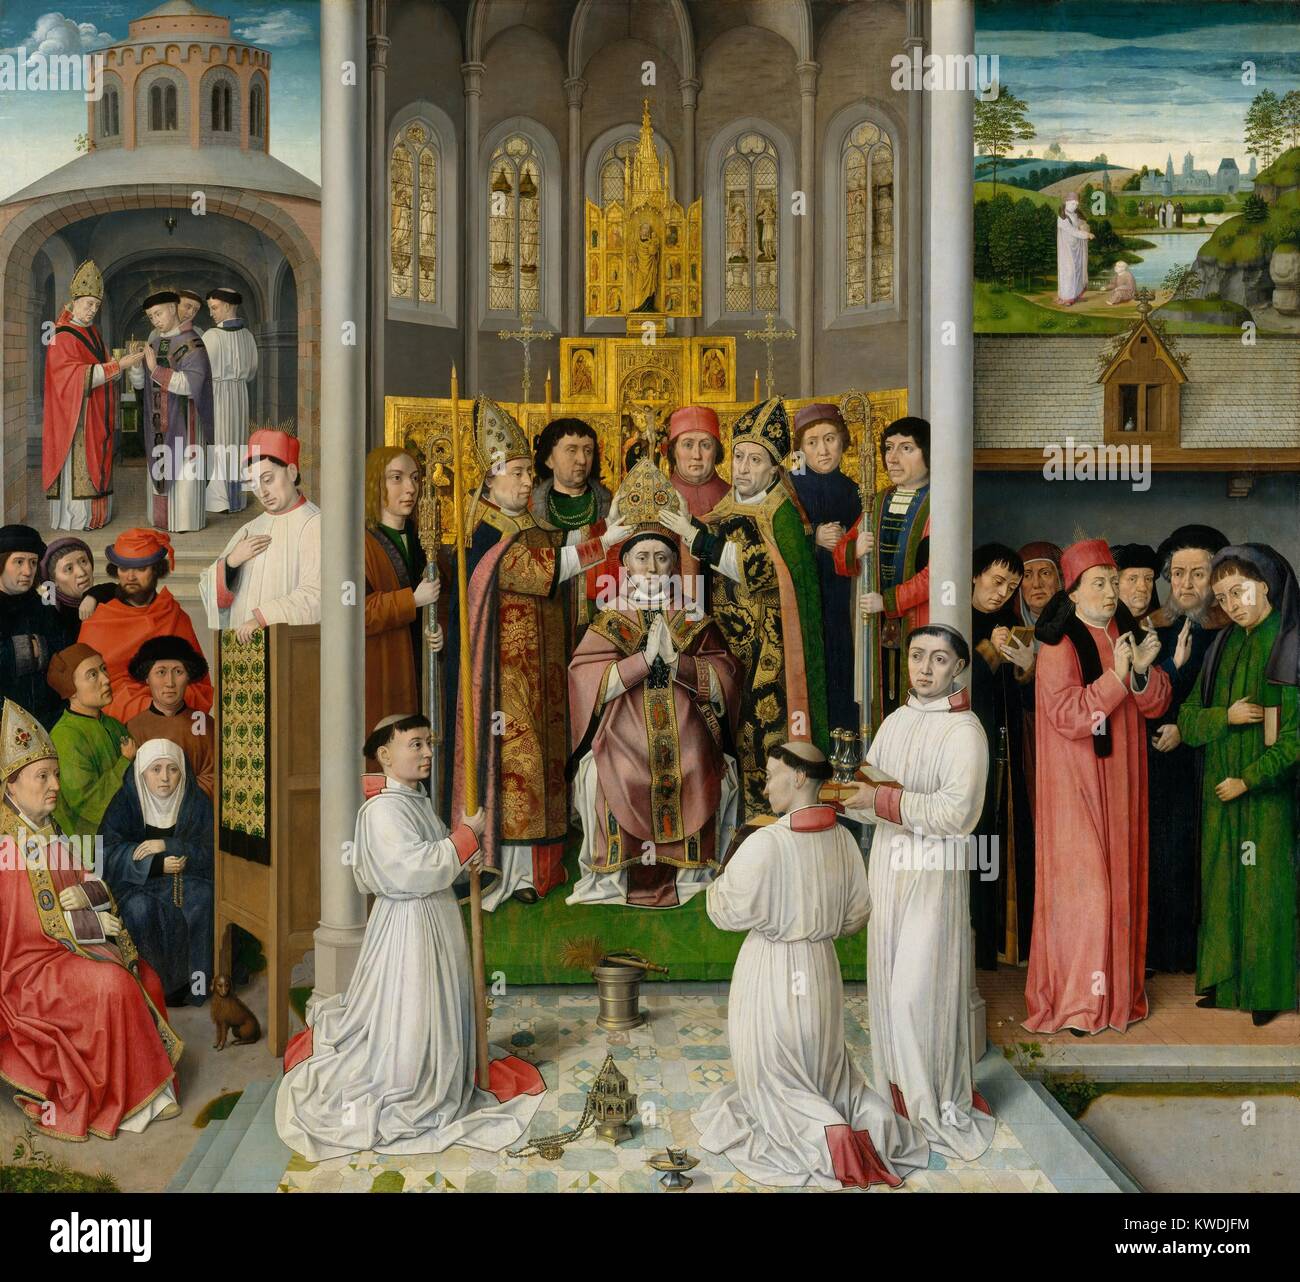 SCENES FROM LIFE OF ST. AUGUSTINE OF HIPPO, 1490, Netherlandish, Northern Renaissance oil painting. Saint Augustine, a 5th century Christian theologian, is depicted in five separate scenes. In the center, Saint Augustine is consecrated Bishop of Hippo, a Roman city in North Africa. On left, he is ordained as a priest; he preaches, while his mother, Monica, prays with the rosary. On right, is the legendary scene with the boy trying to filling a hole in the sand with the sea; at lower right, Saint Augustine preaches (BSLOC 2017 16 110) Stock Photo